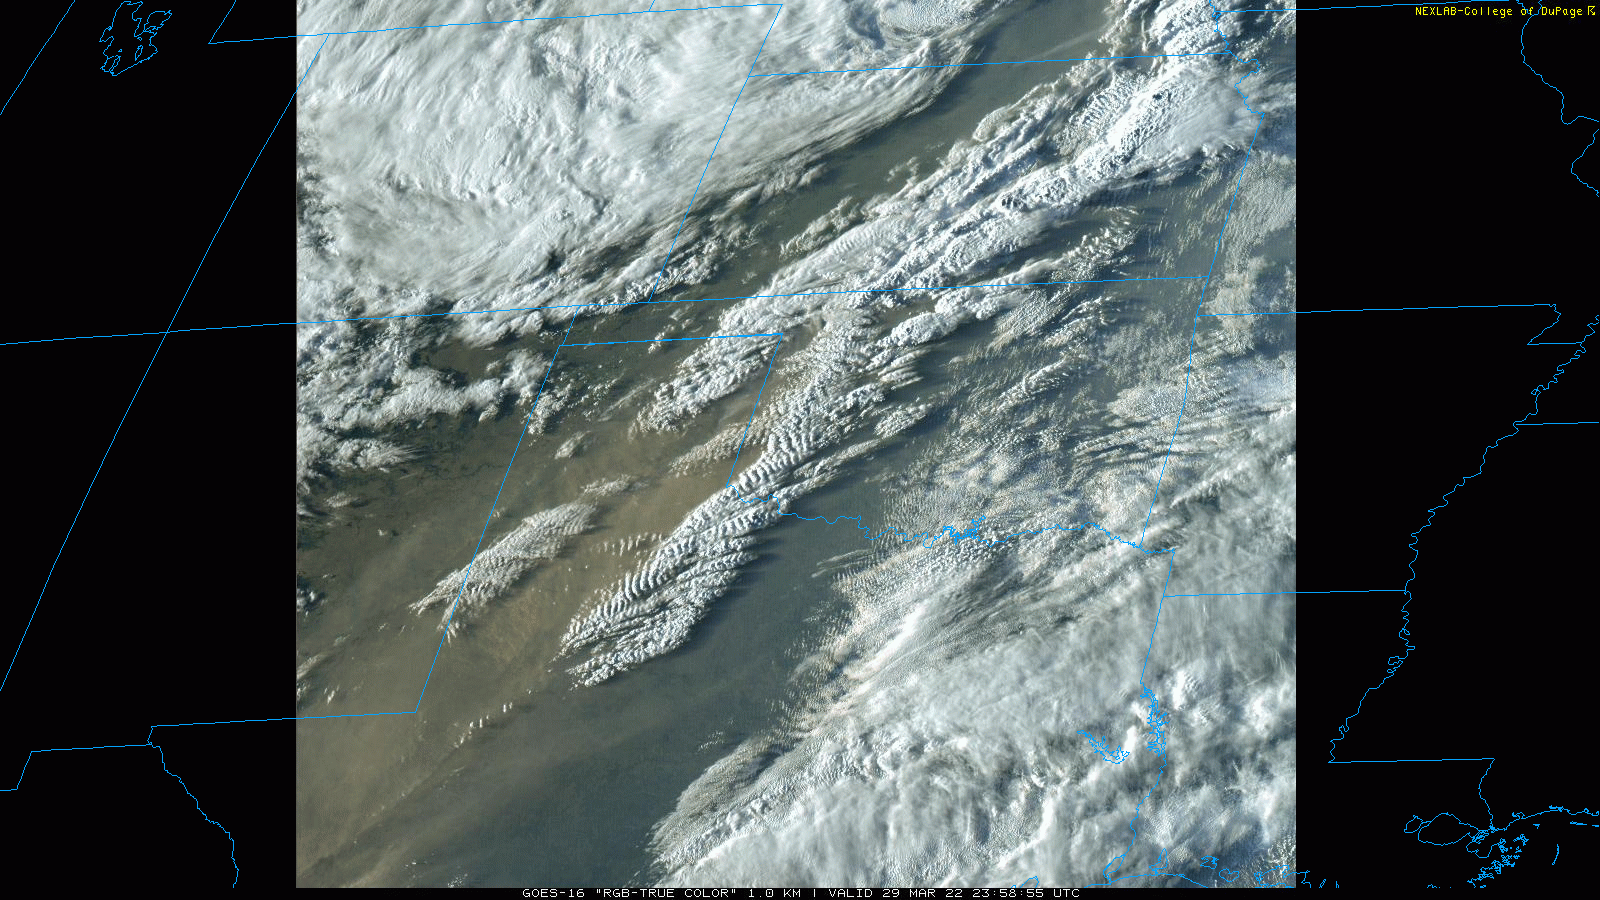 "True Color" satellite loop valid from 6:58 pm to 7:07 pm on Tuesday (29 March 2022). Note the extensive dust plume moving from southwest-to-northeast from Far West Texas over the South Plains and Texas Panhandle.